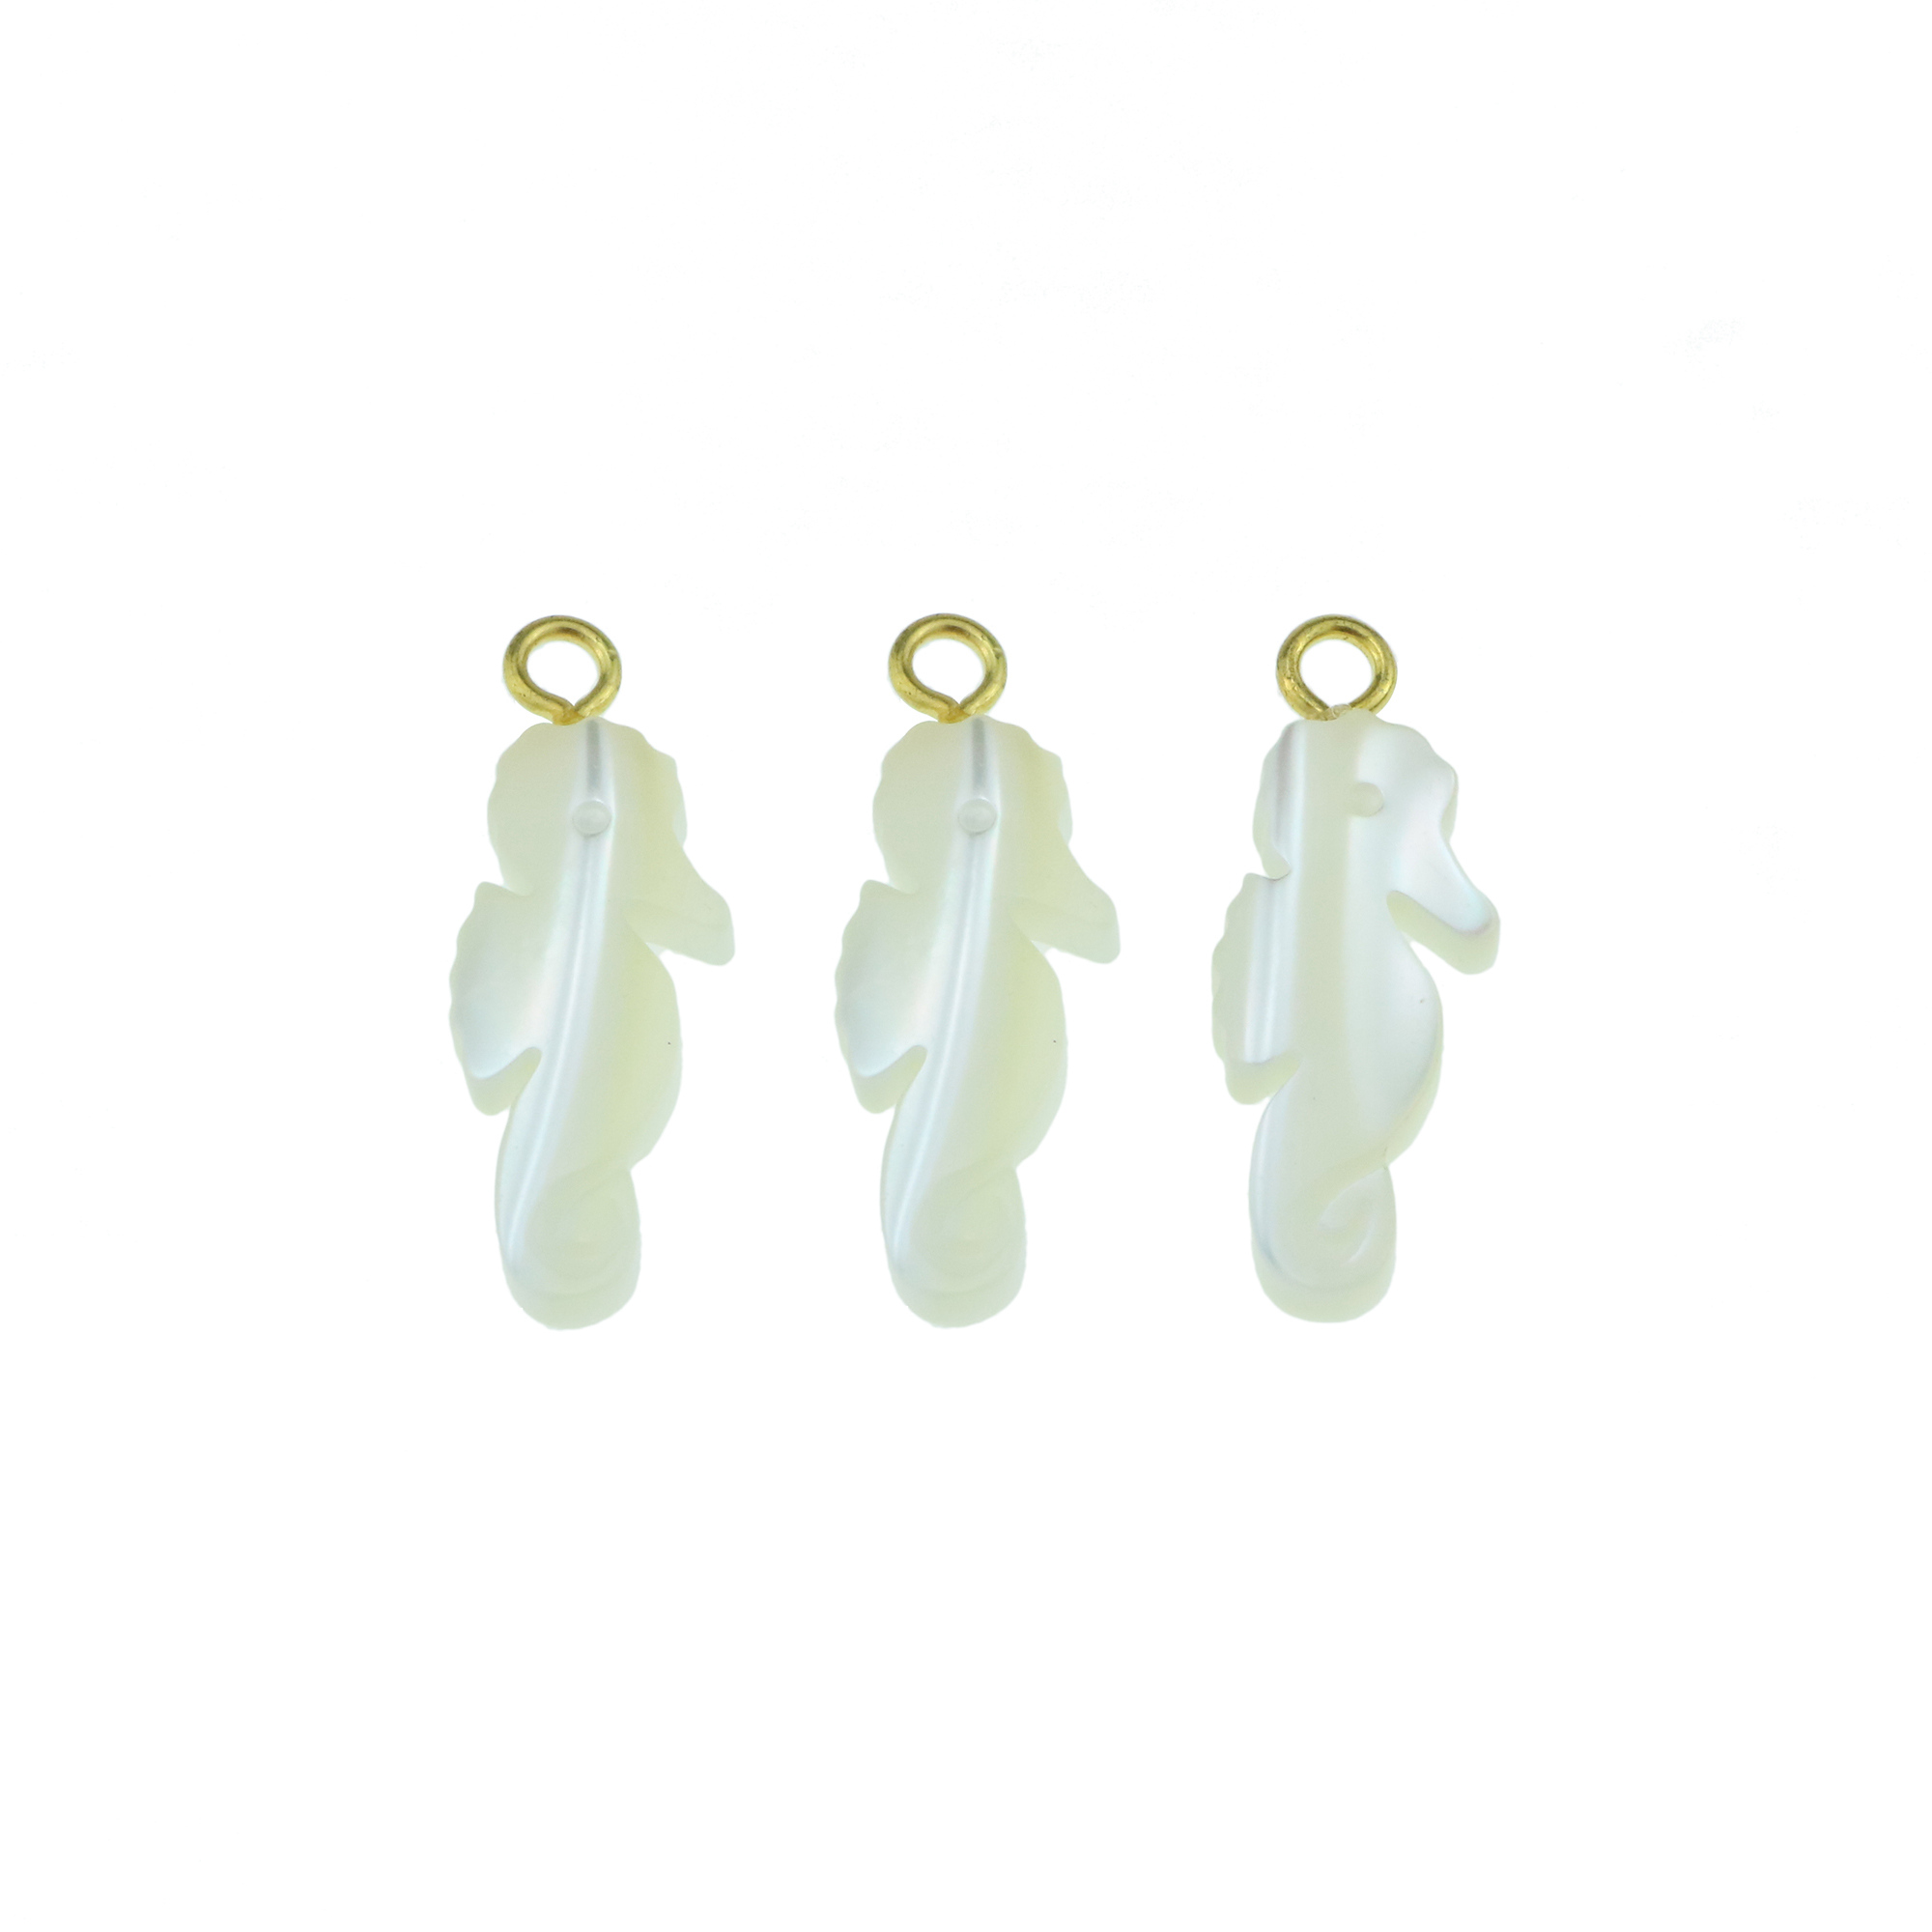 5Pcs 12x20MM White Mother of Pearl Shell Sea Horse Pendant Charm DIY Supplies Findings 1800518 - Click Image to Close